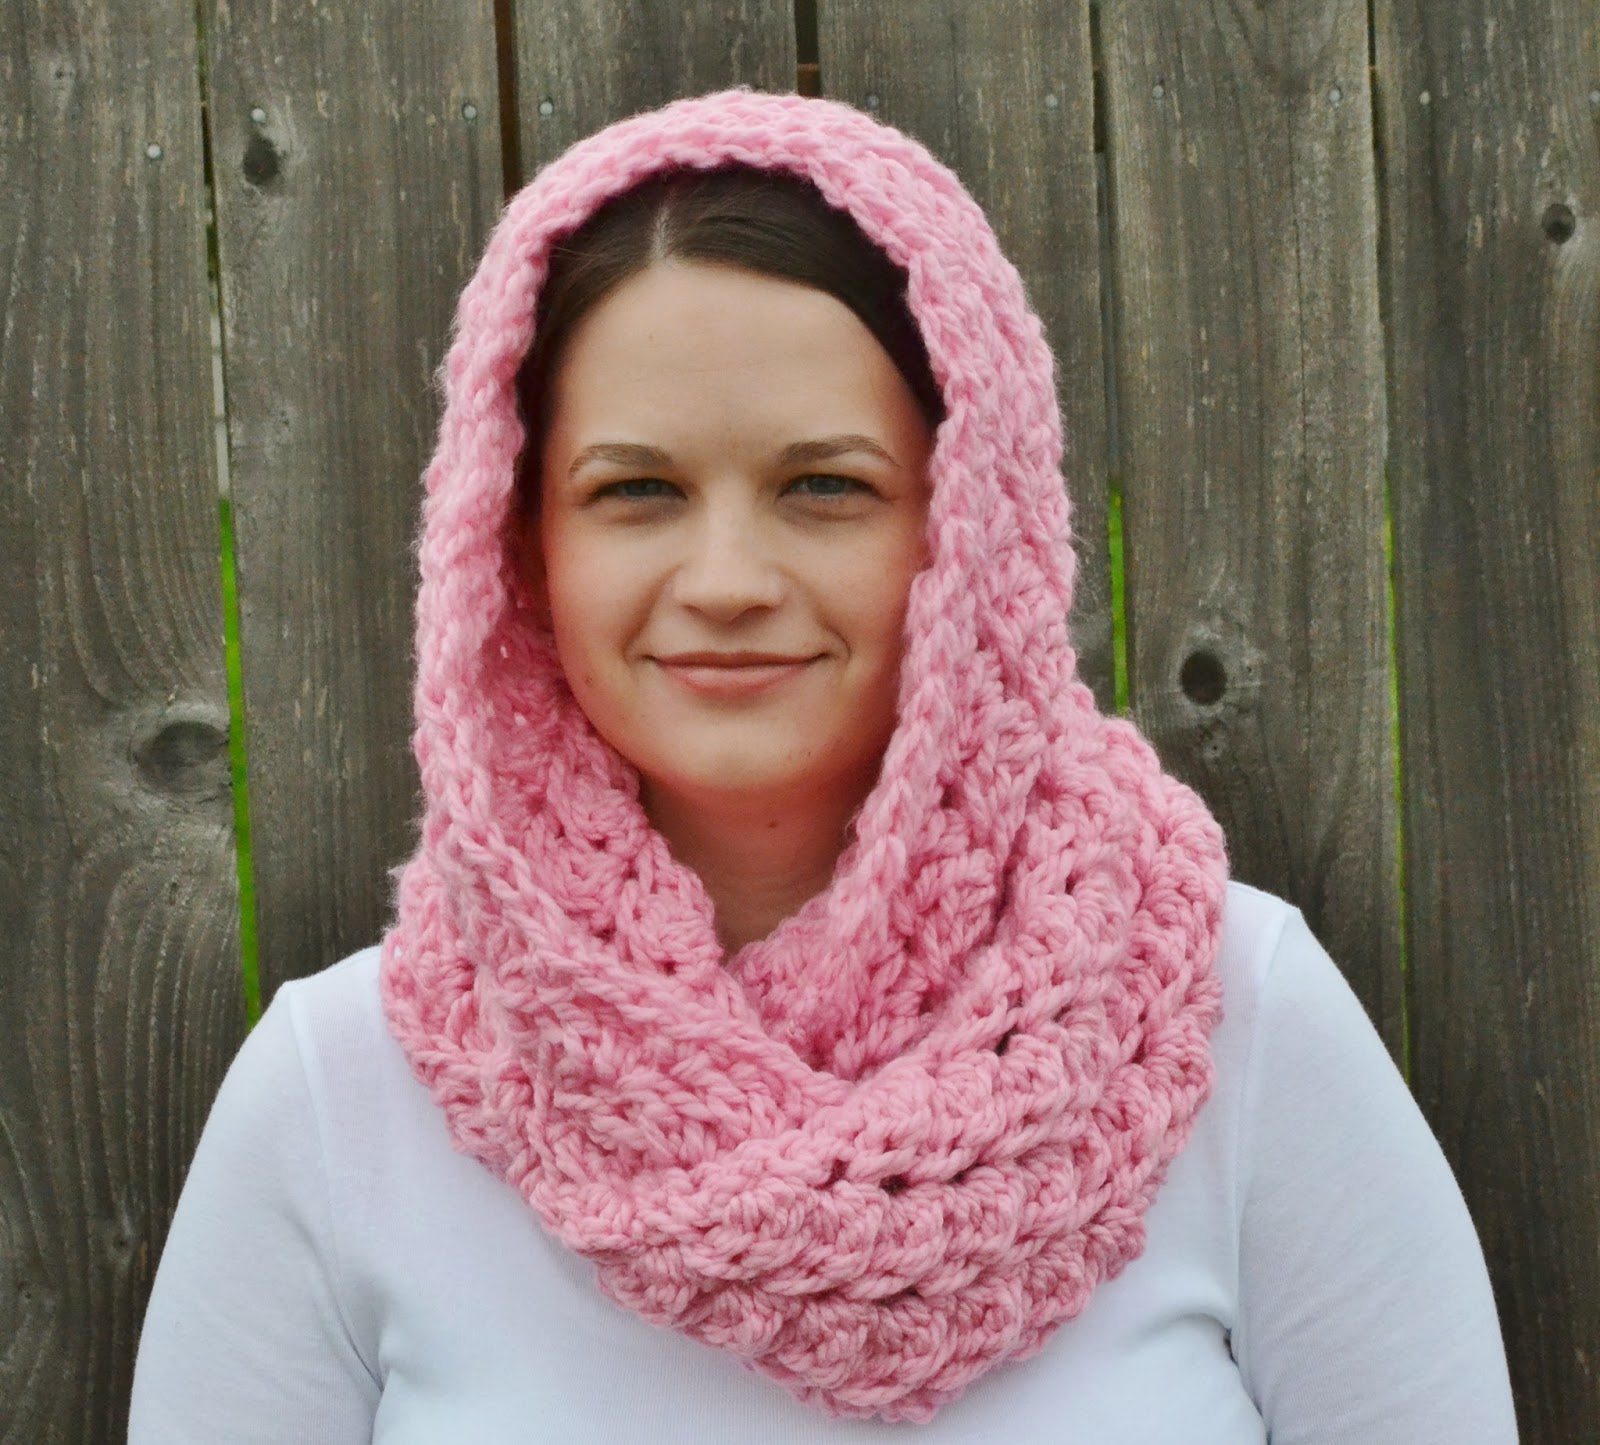 crochet hooded Share   Twitter Facebook Share Share pattern BlogThis! to to  scarf Email This to